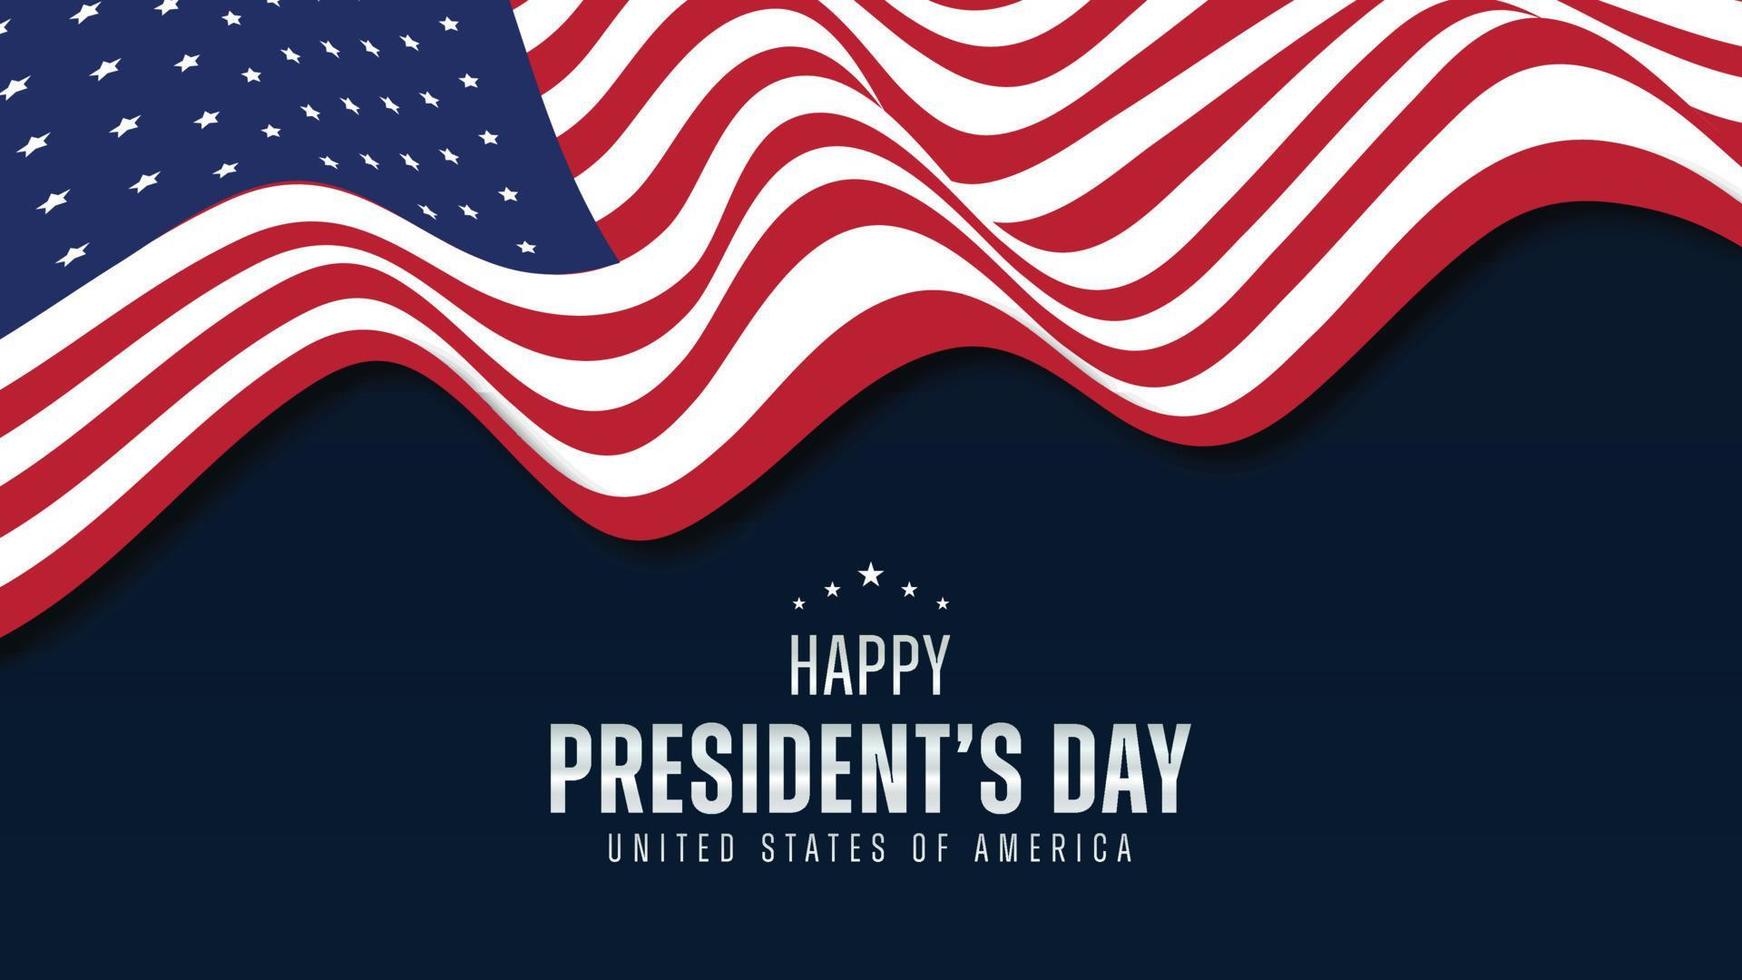 Happy President's day design background with USA Flag dark blue background, stars and stripes vector